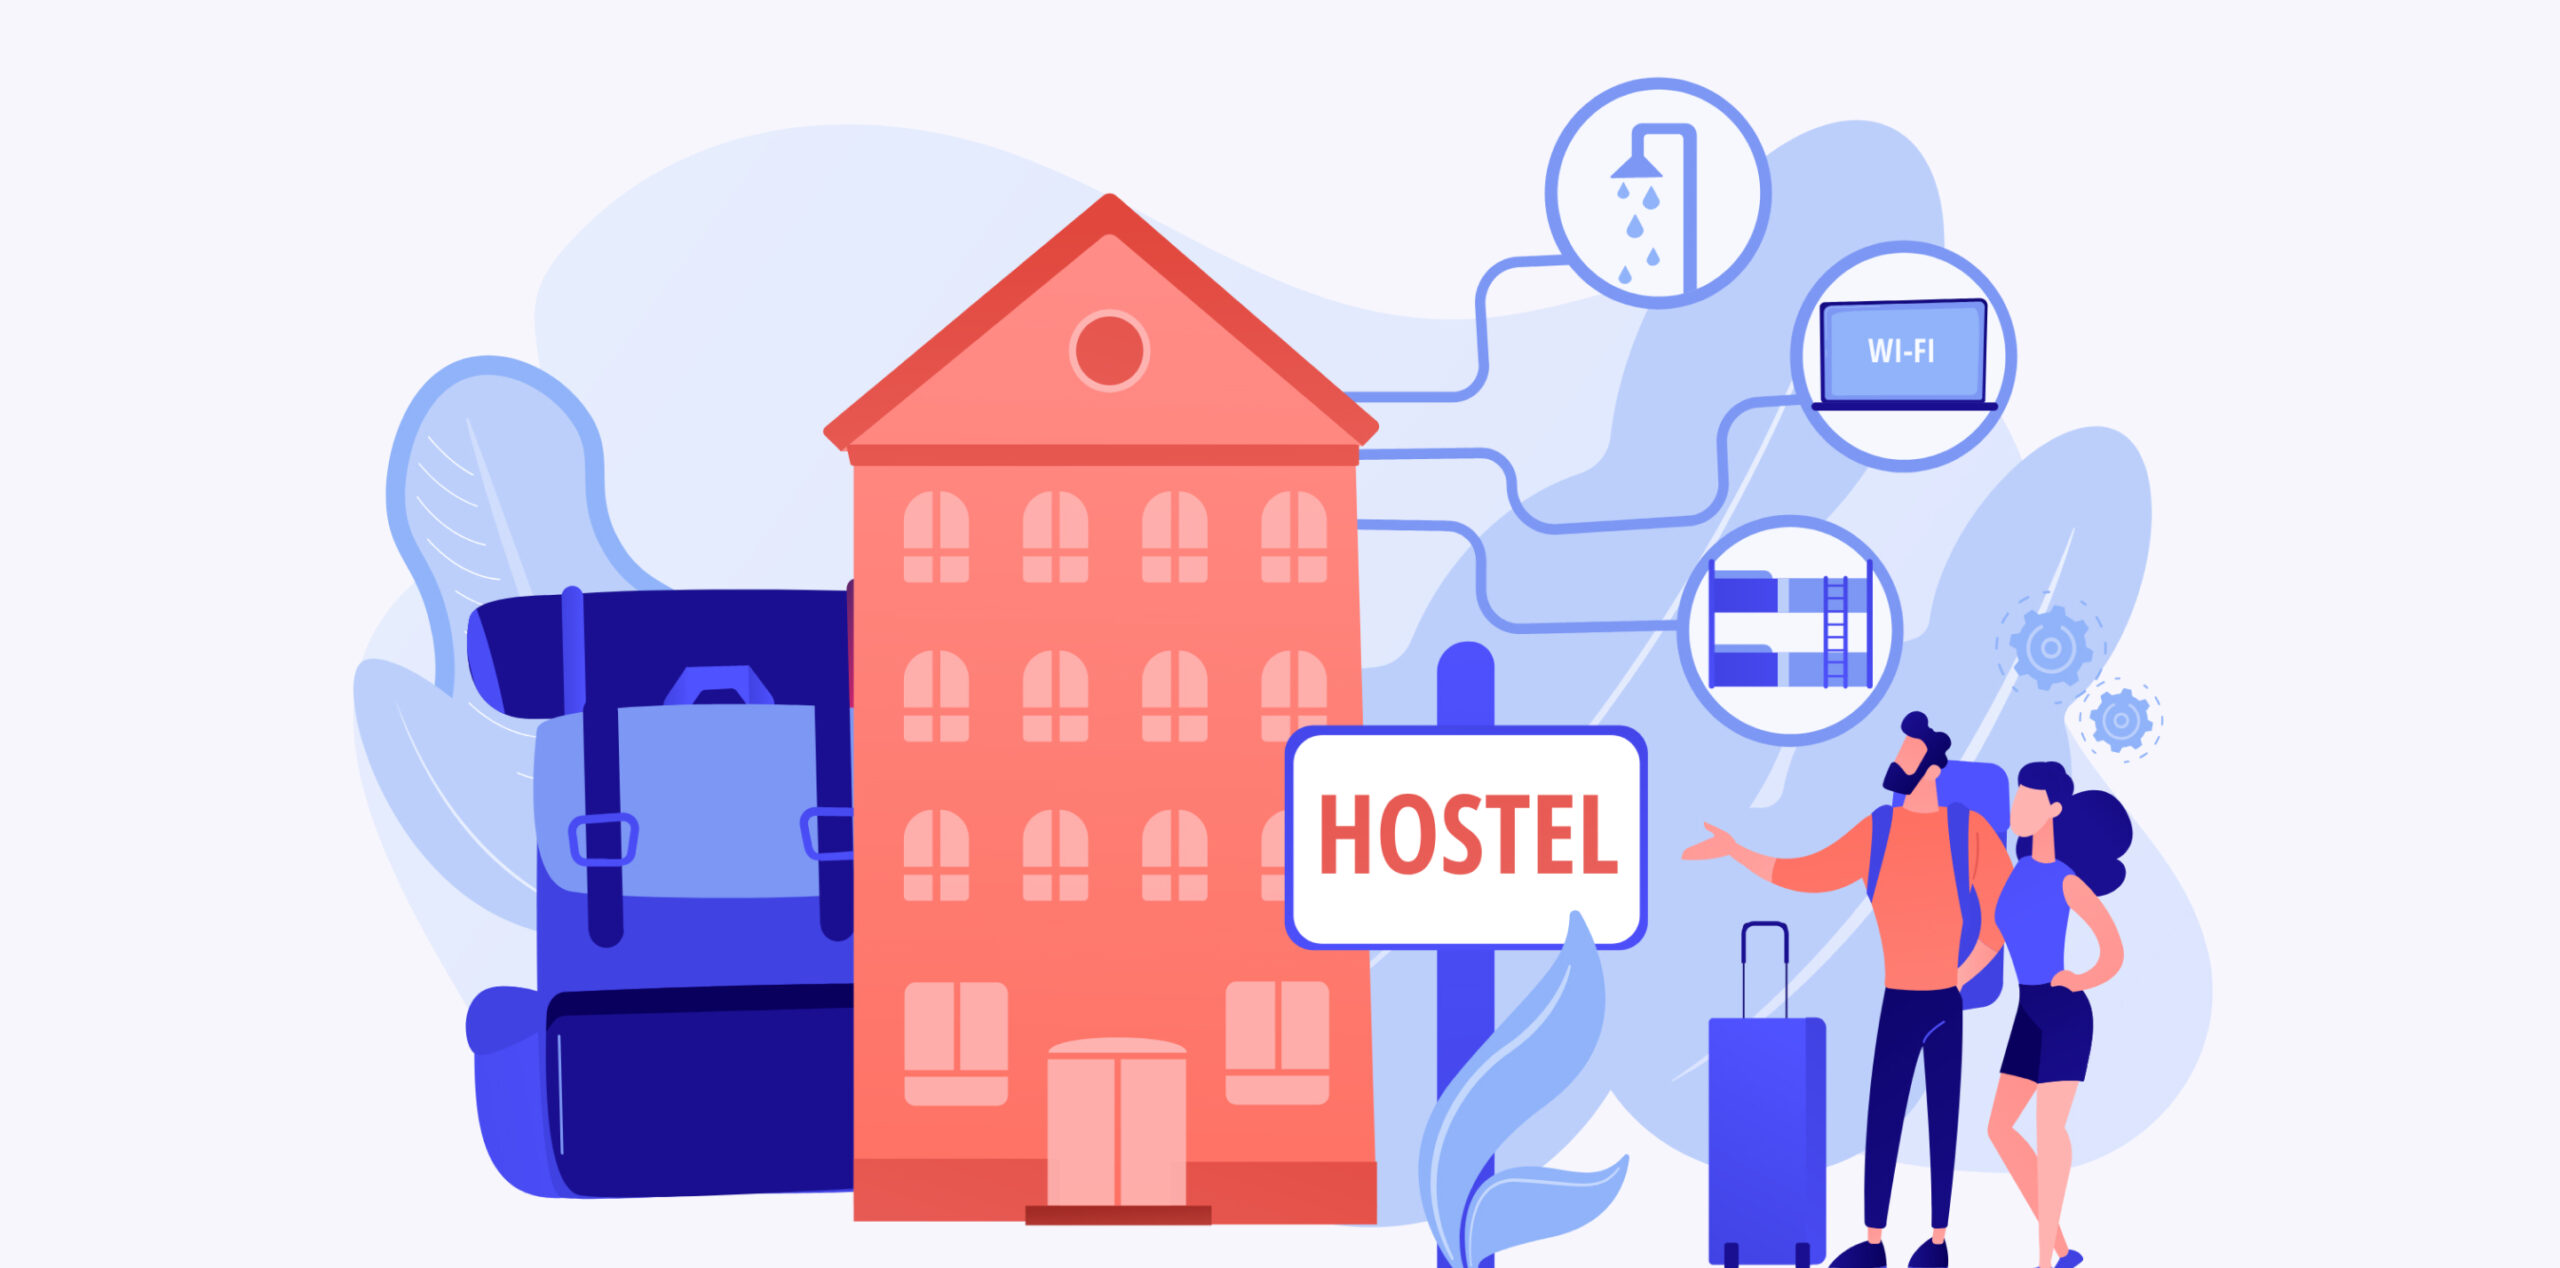 Top Features of Hostel Management Software